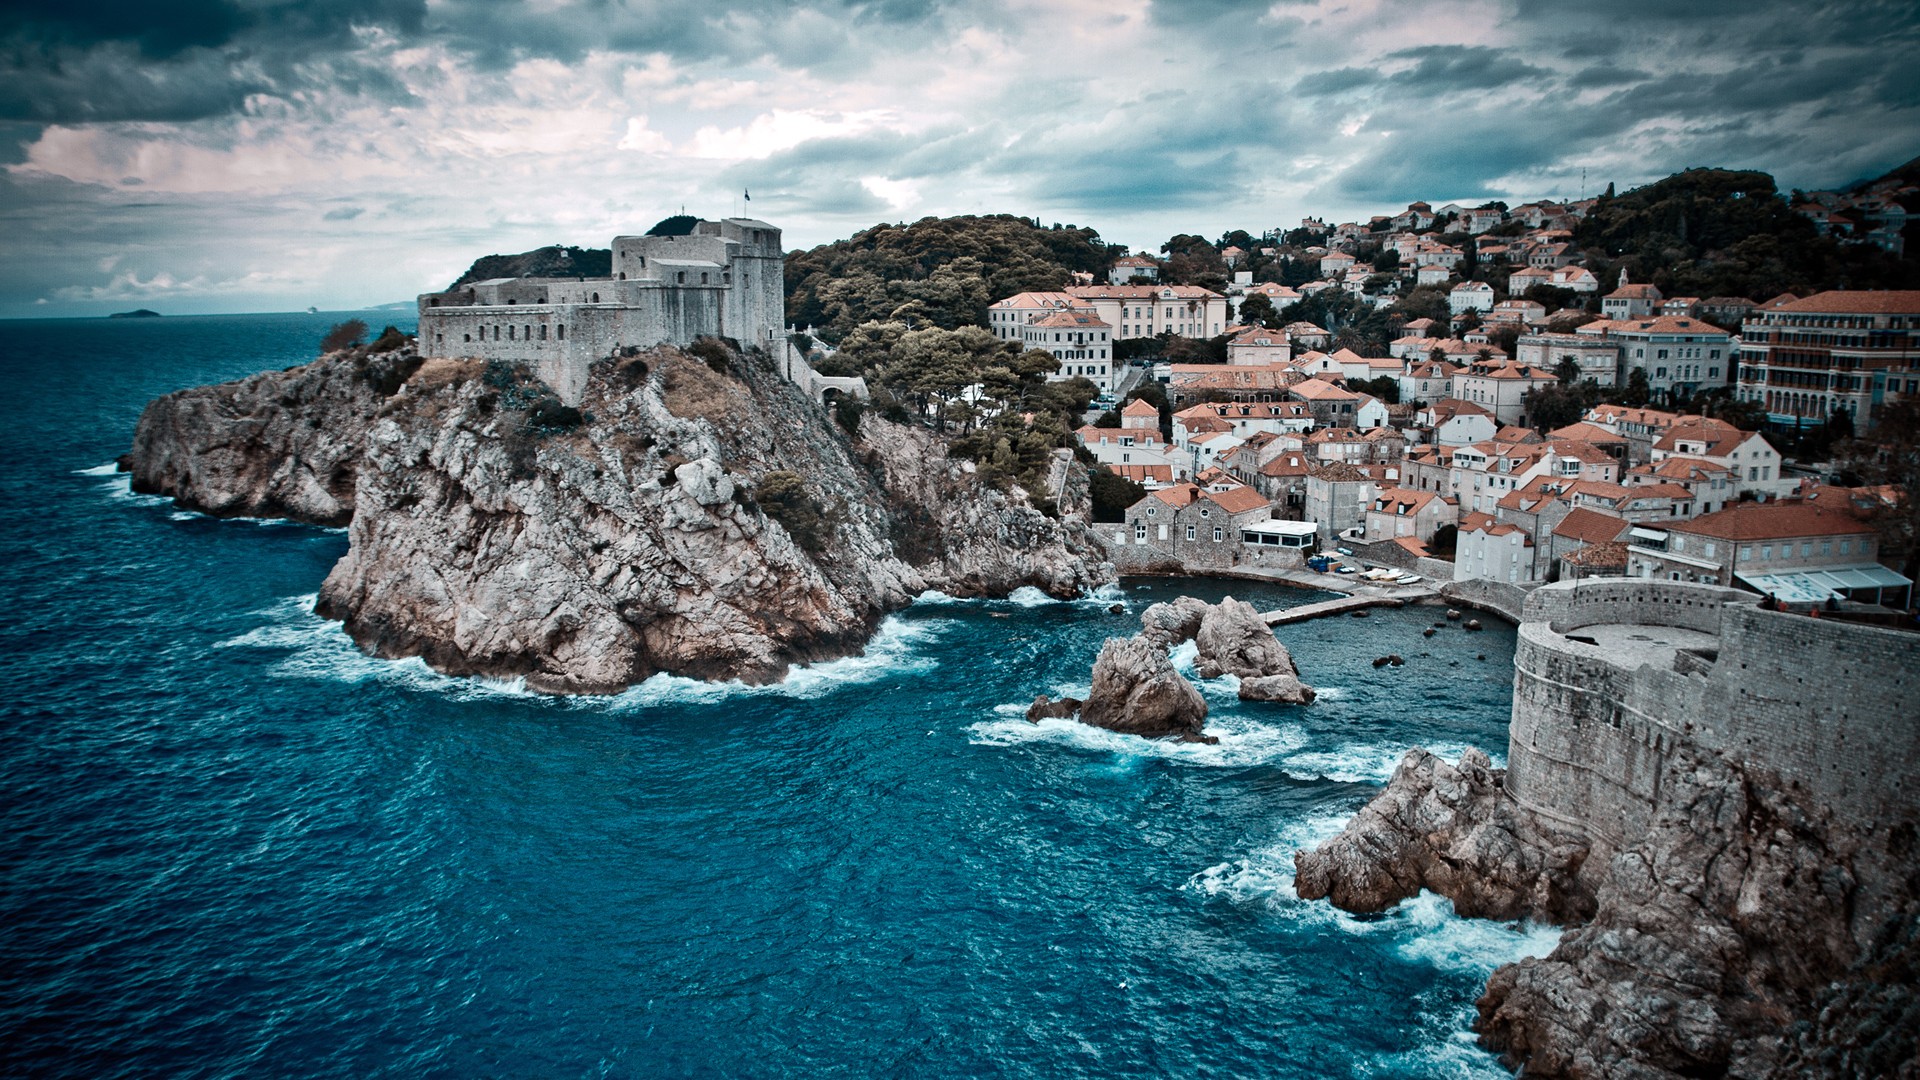 General 1920x1080 sea building bay Dubrovnik Croatia nature HDR clouds waves cliff gray rocks outdoors